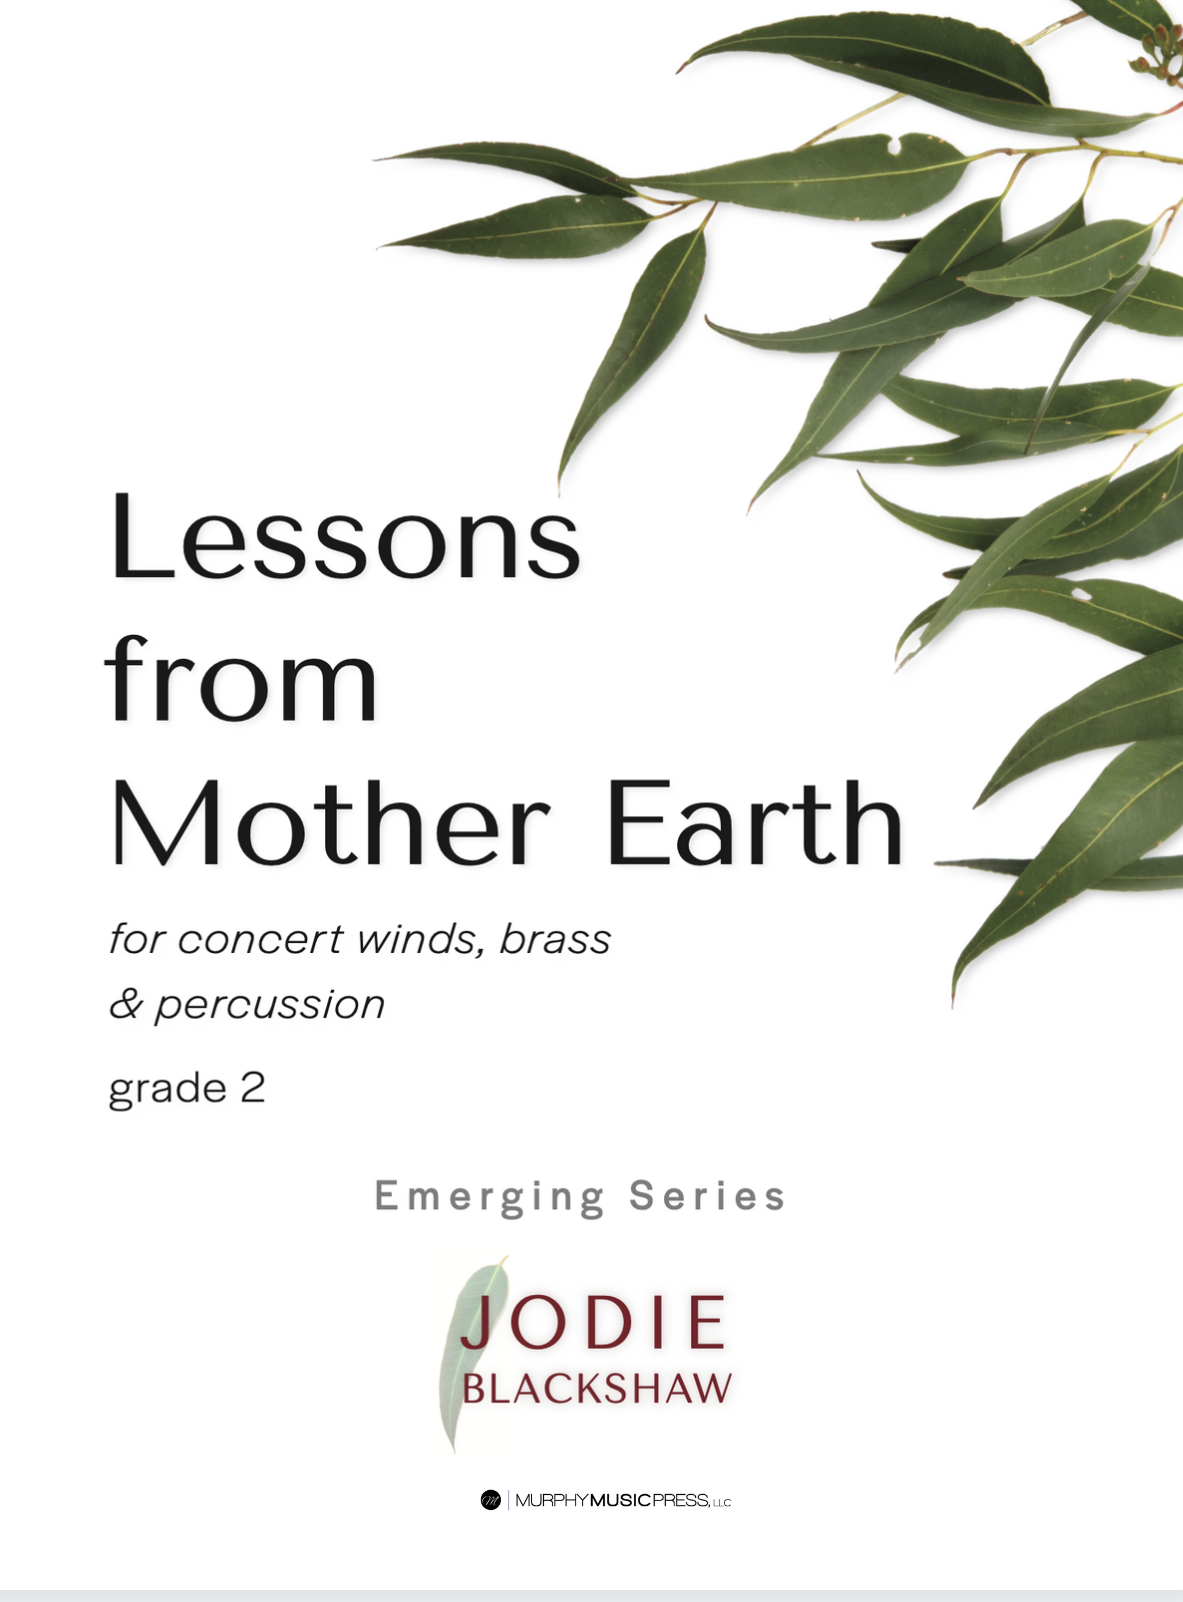 Lessons From Mother Earth by Jodie Blackshaw